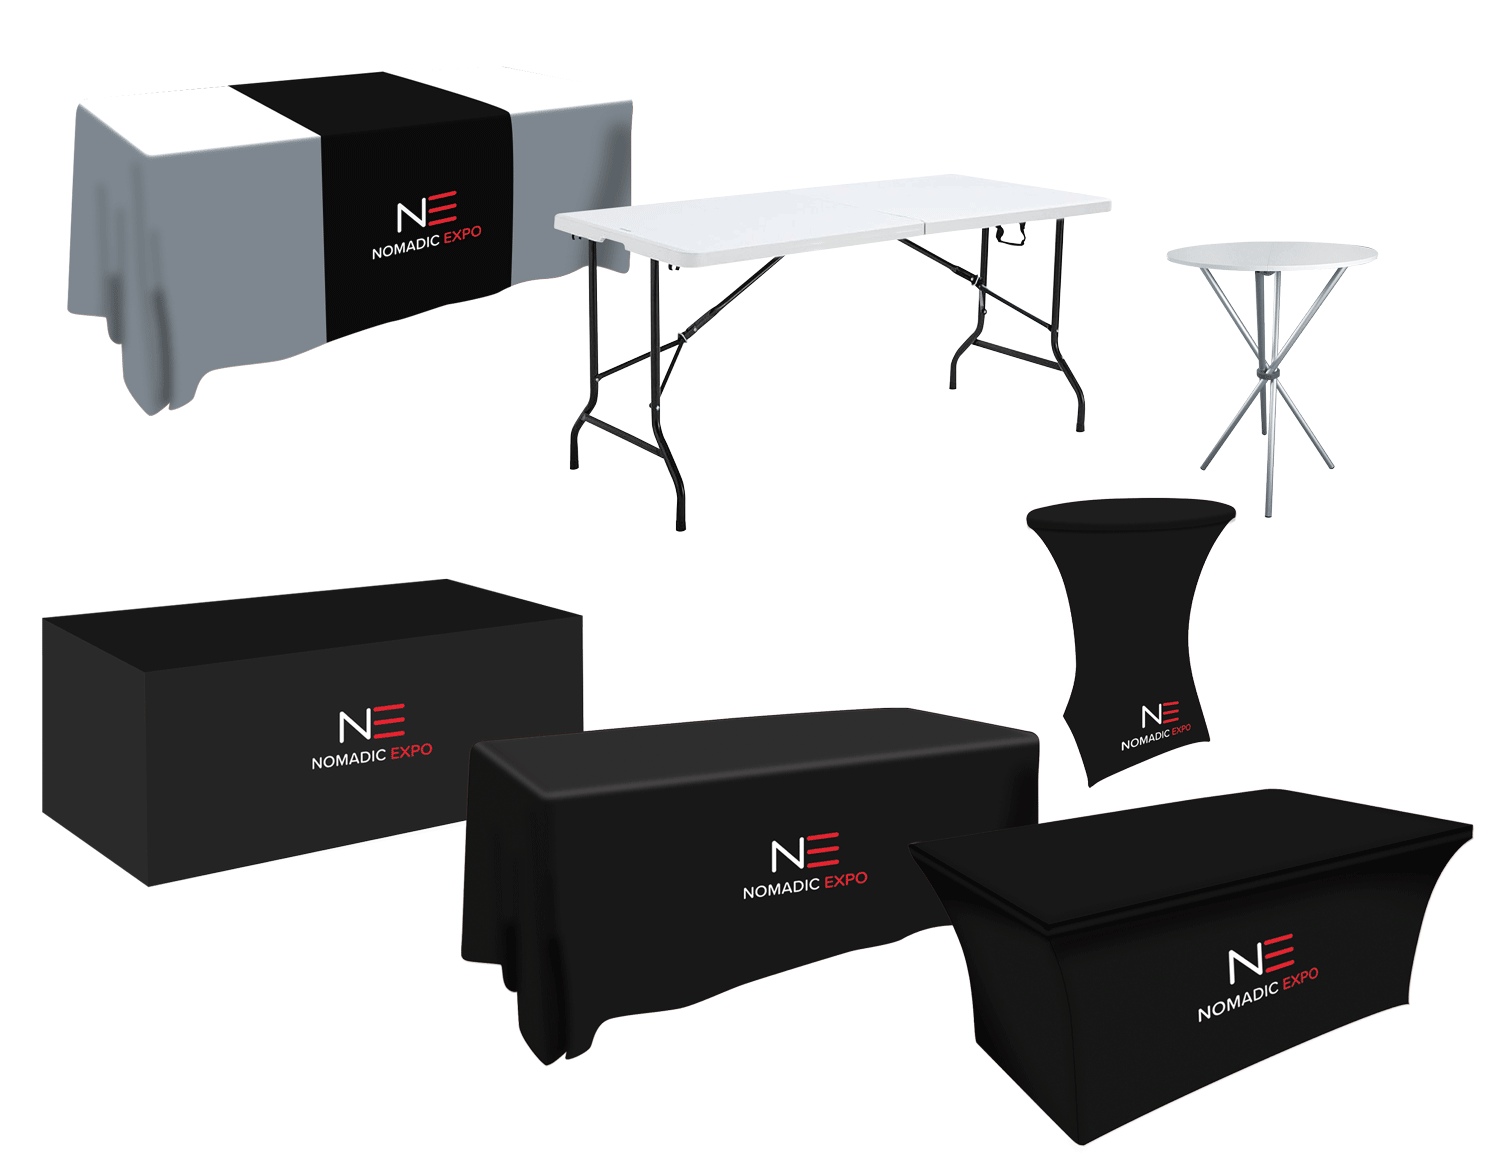 Tables, tablecloths and table runners